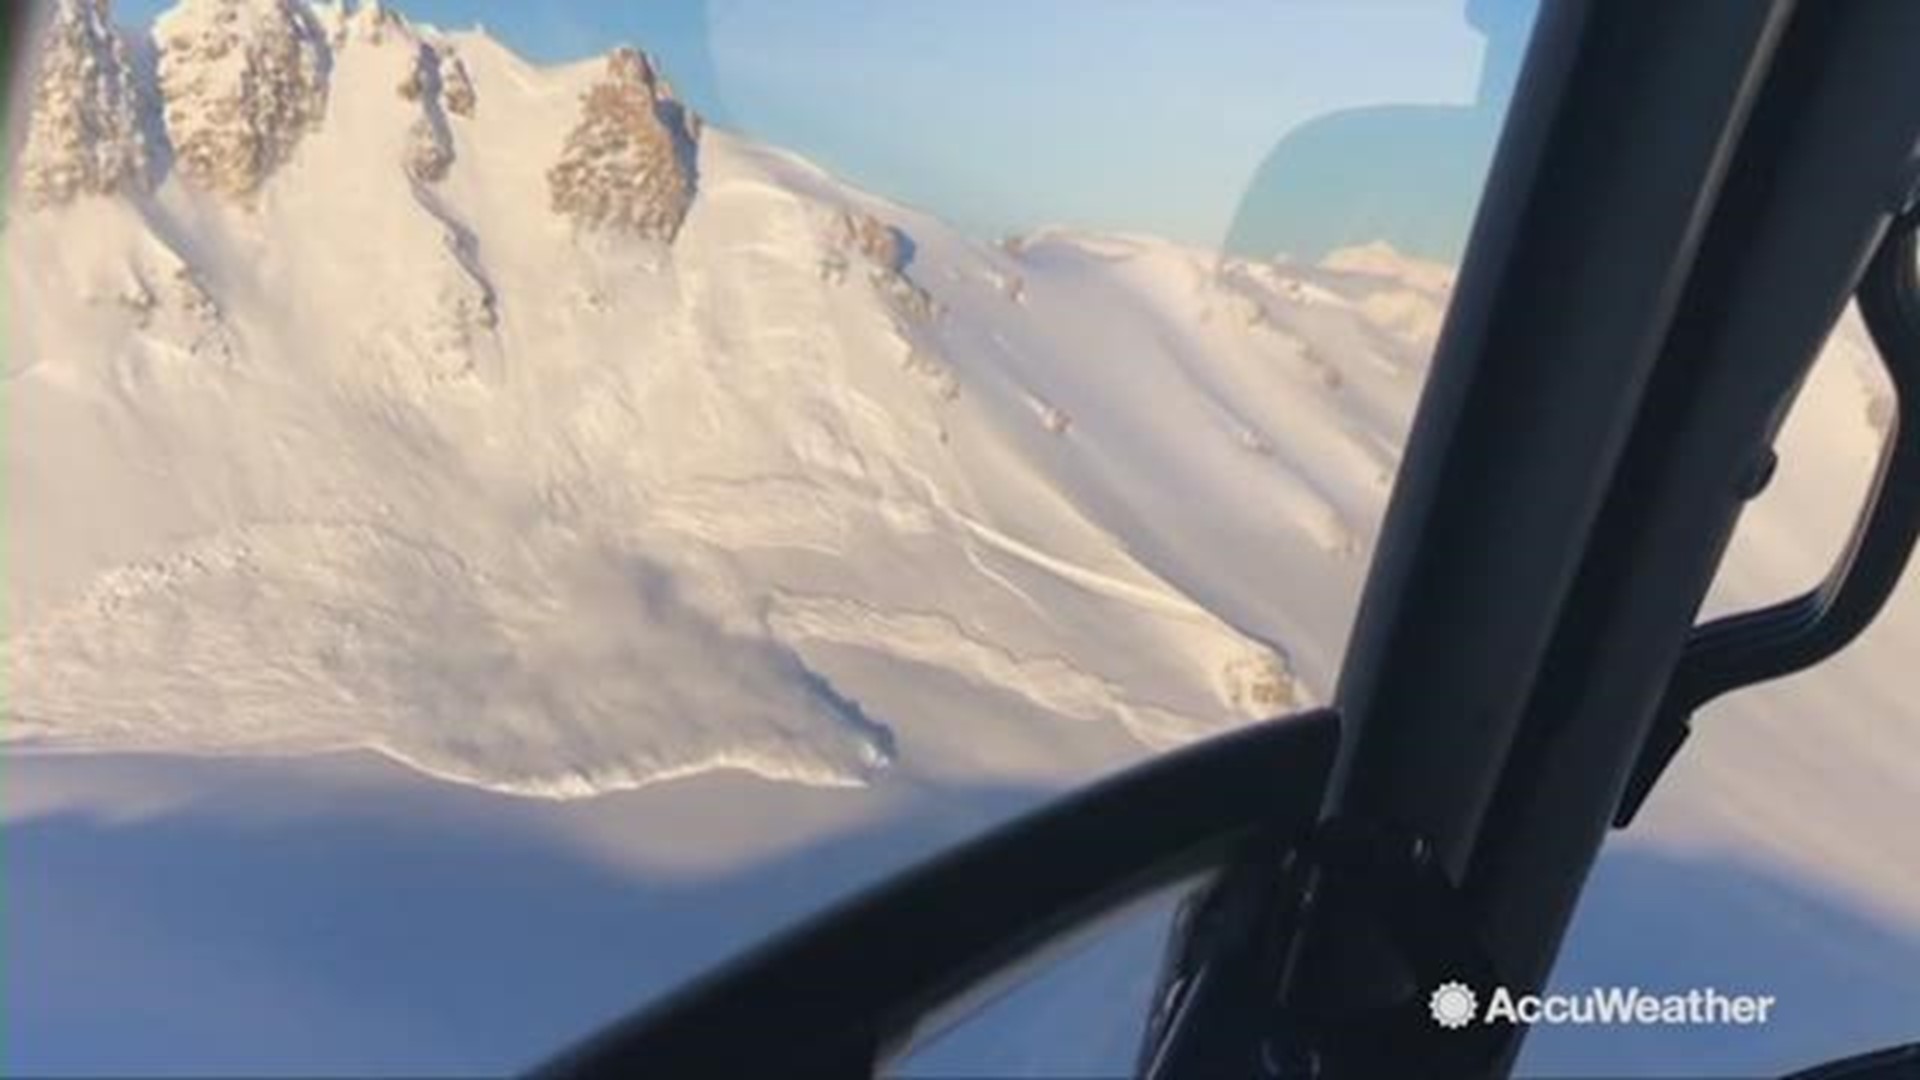 Helicopters dropped controlled explosives on a Switzerland mountain this week, causing several avalanches. Reuters reports that these controlled explosives are a way to remove additional amounts of snow, so that an avalanche doesn't occur unexpectedly in